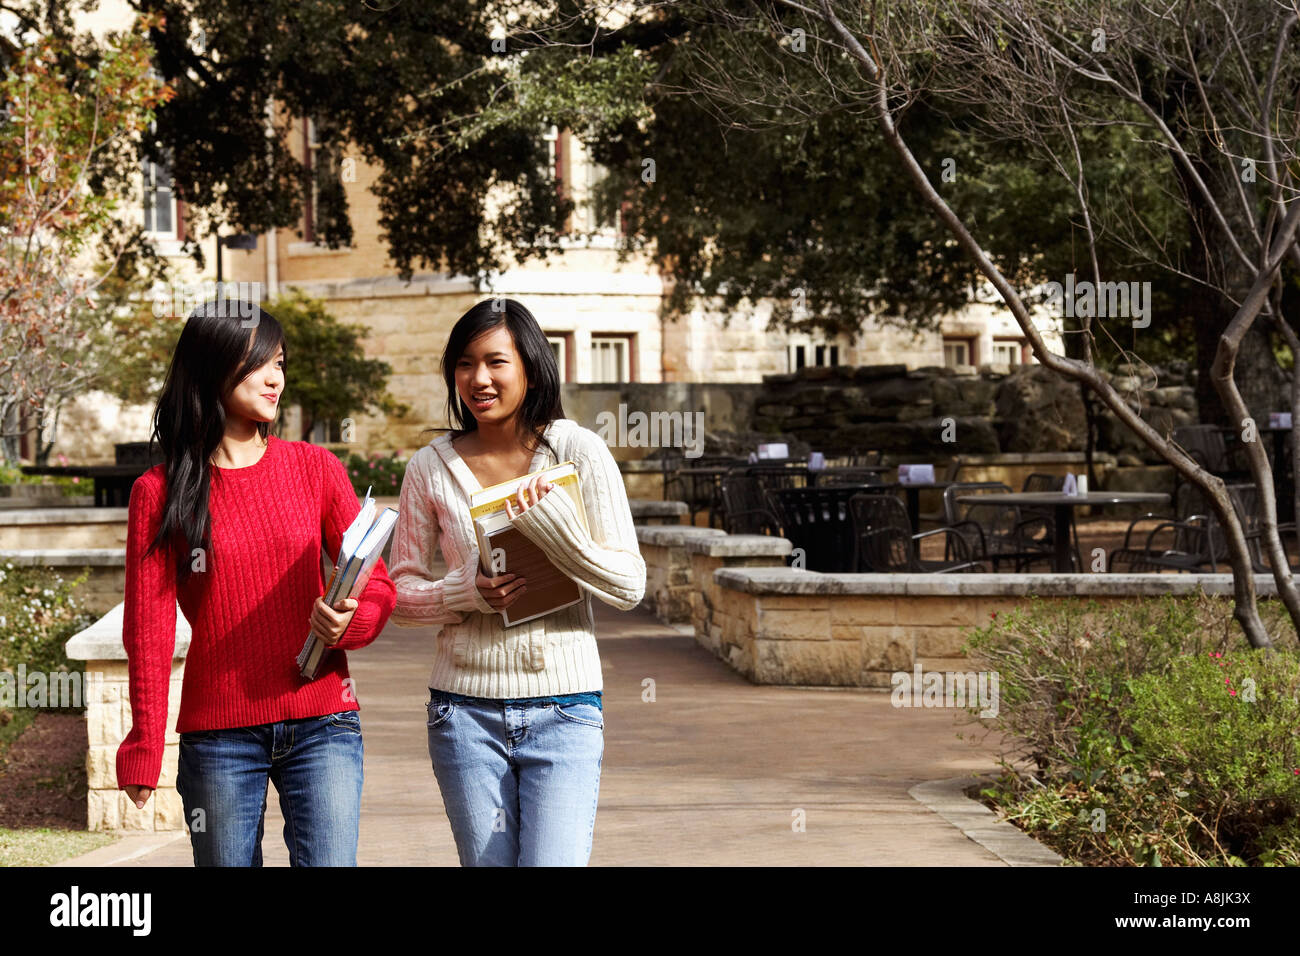 Two young women walking in a college campus Stock Photo